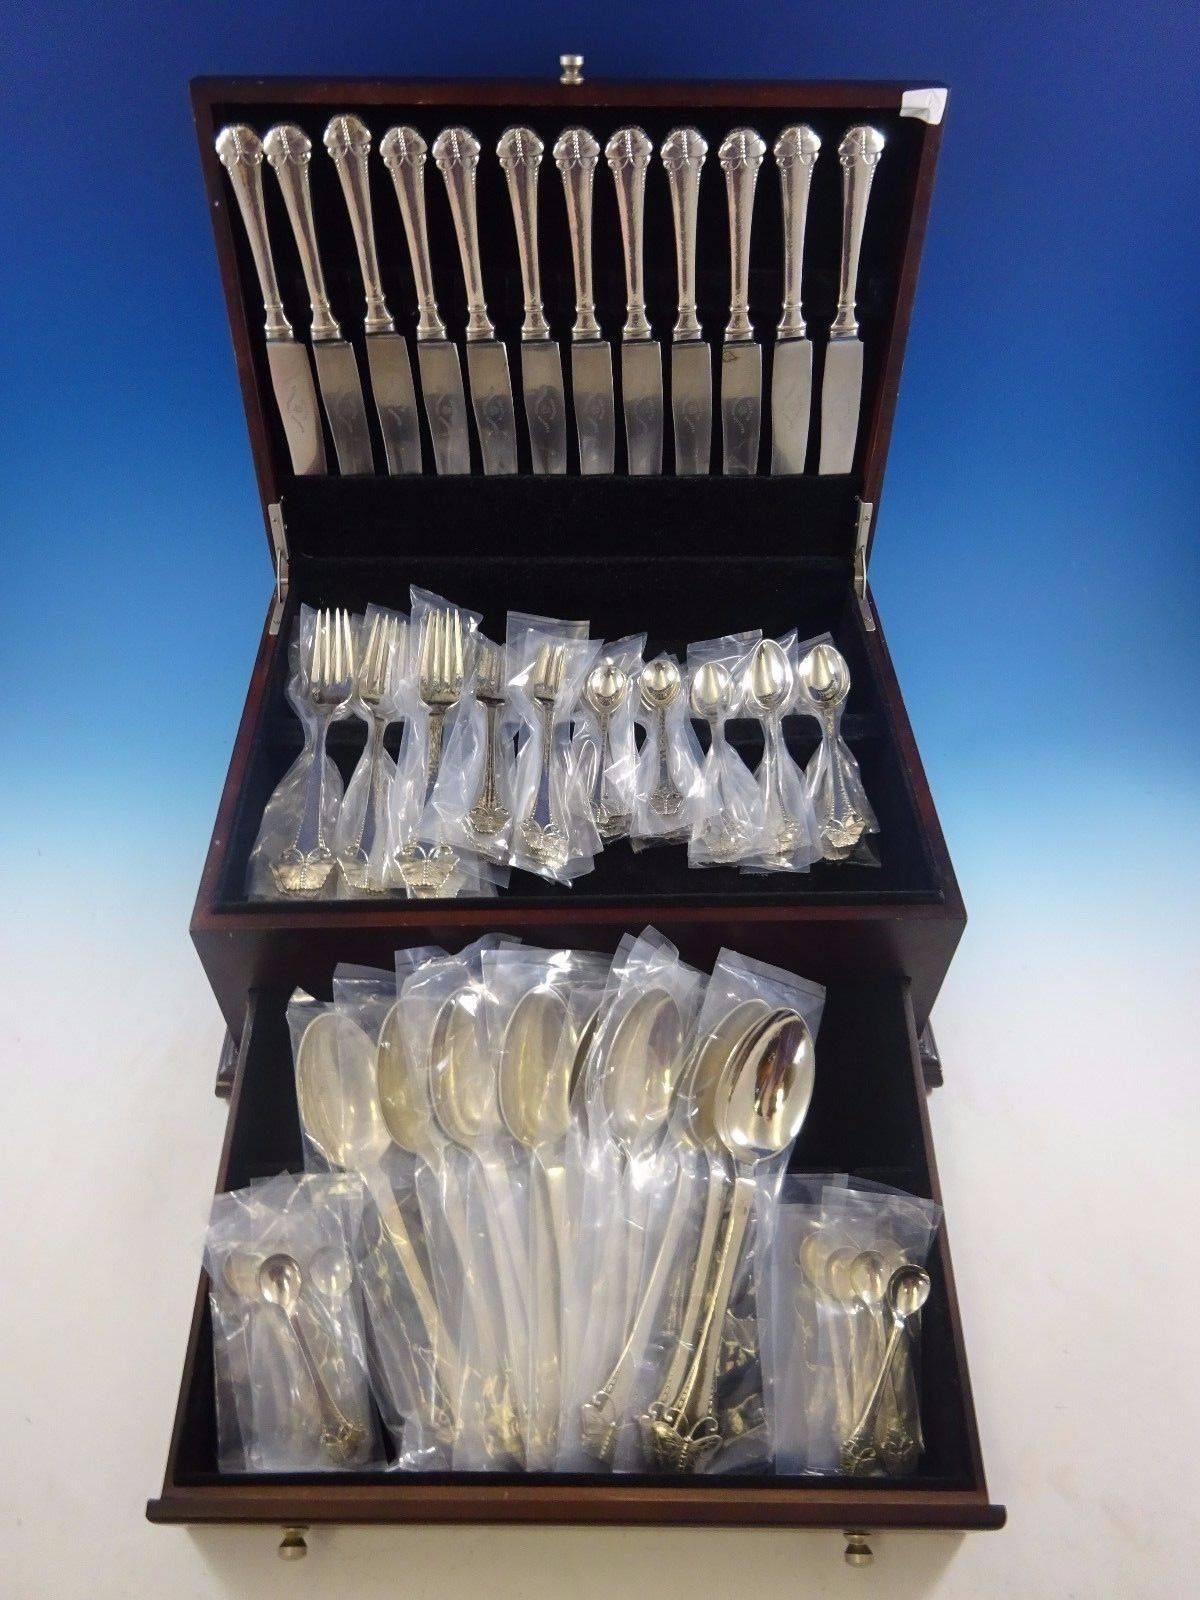 Fabulous butterfly aka Sommerfugl by Frigast 830 silver flatware service set of 92 pieces, rare! This set includes: 12 dinner knives, 10